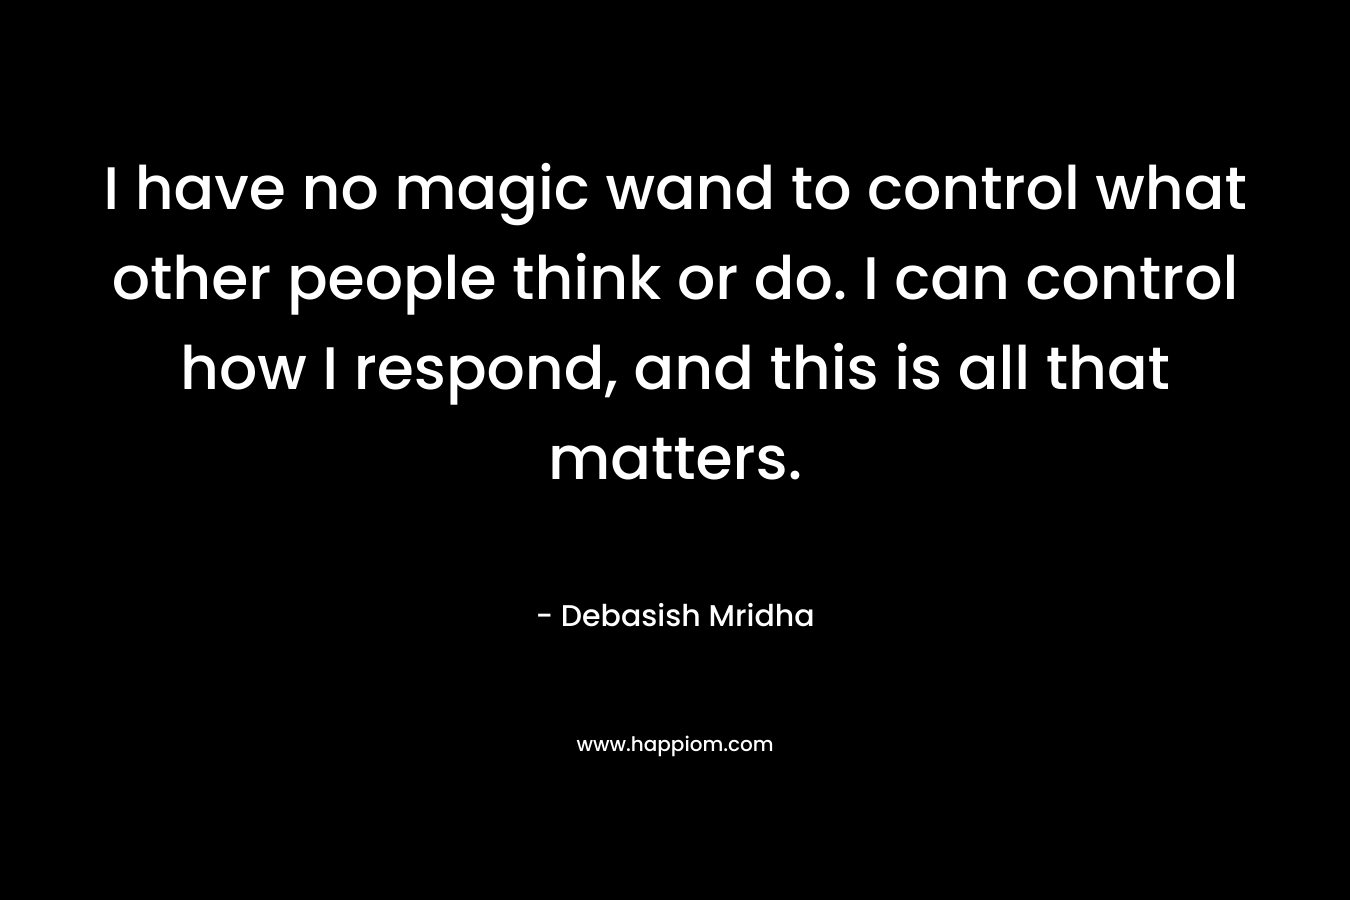 I have no magic wand to control what other people think or do. I can control how I respond, and this is all that matters. – Debasish Mridha